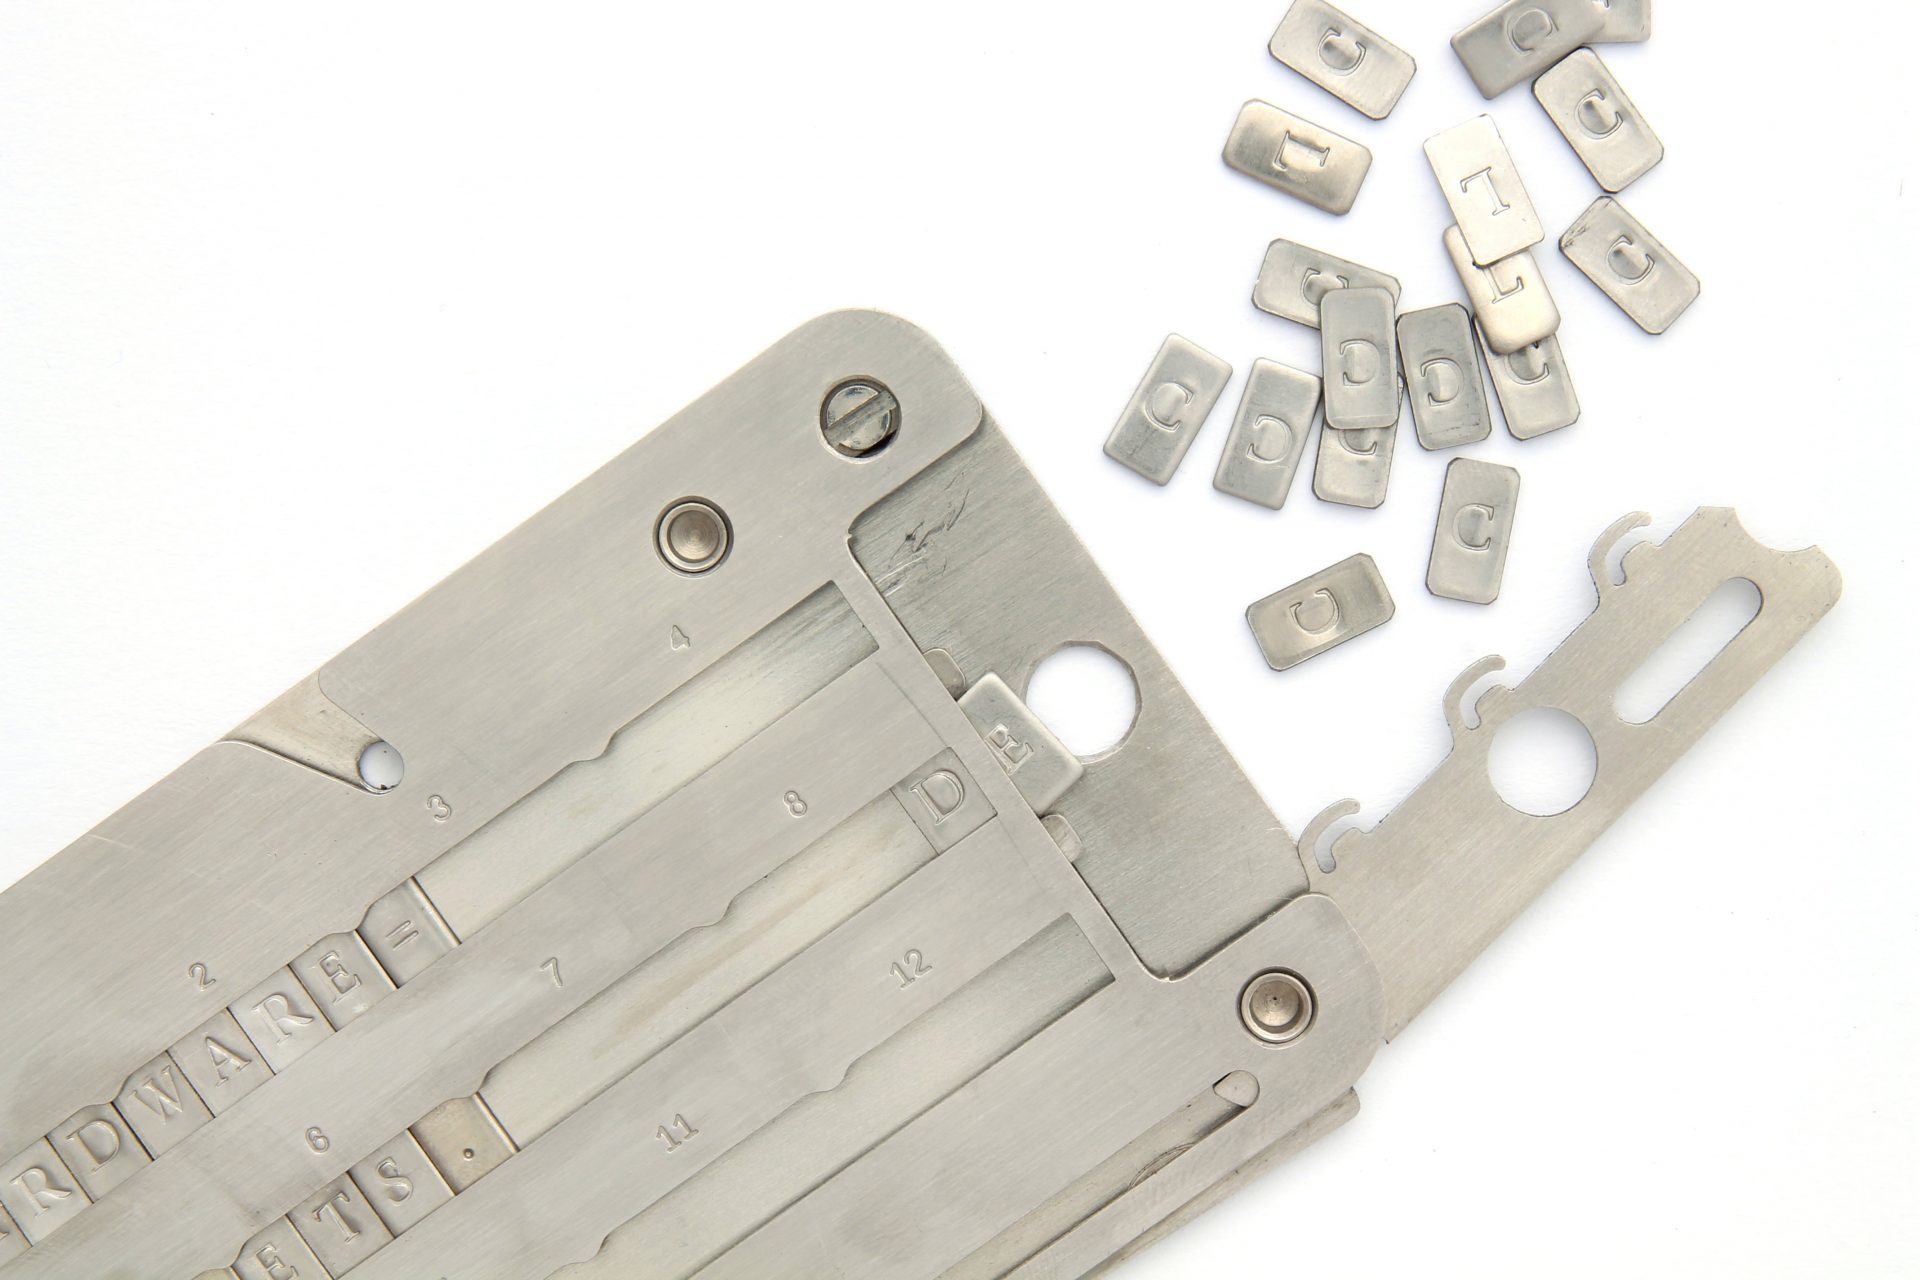 Cryptosteel Cassette Review 2021 - the ultimate backup ...